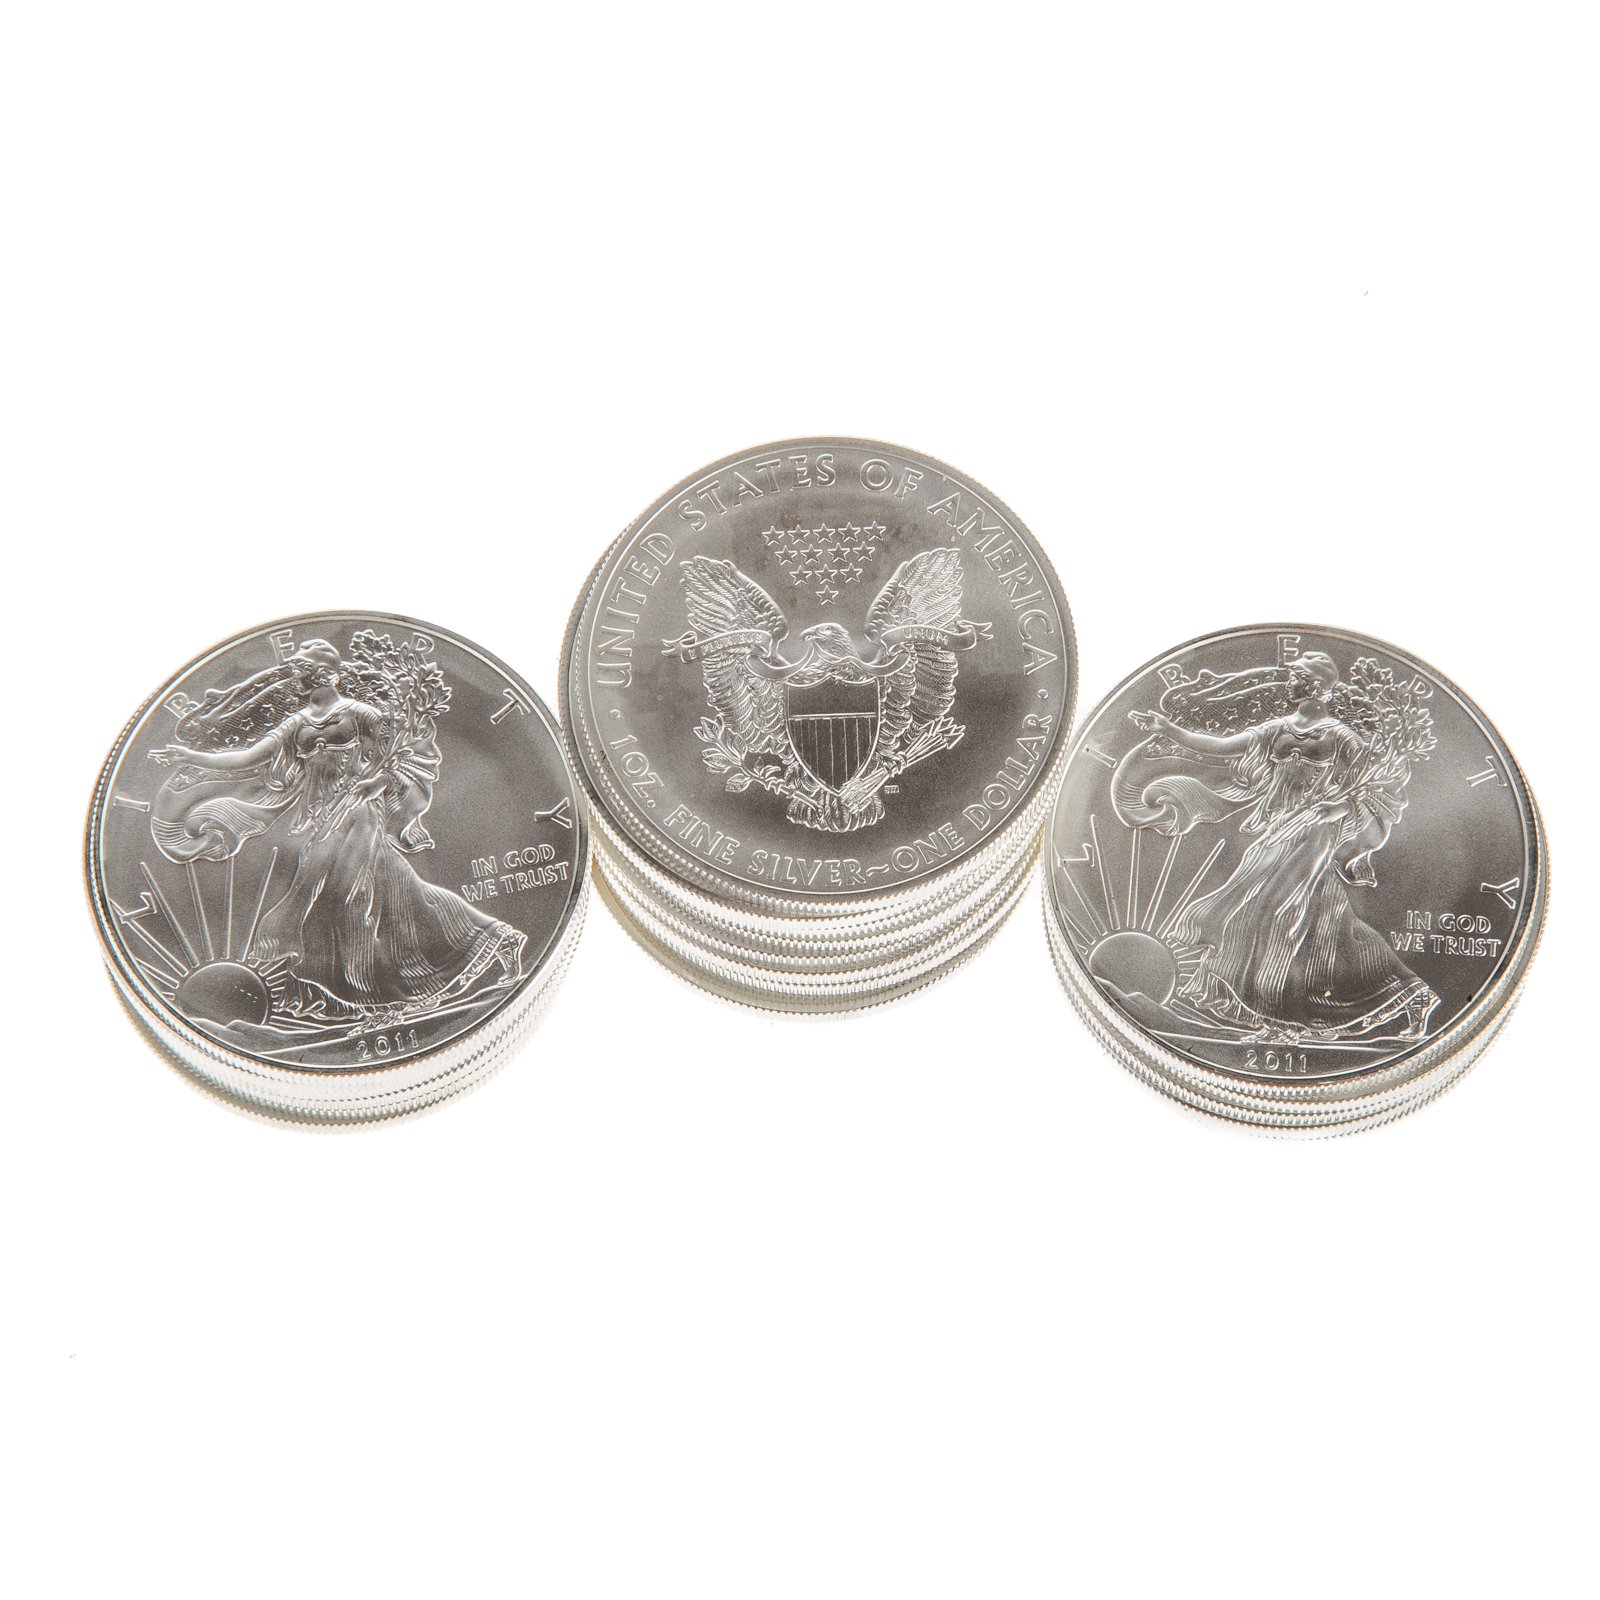 ONE ROLL OF 20 2011 SILVER AMERICAN 2879c4